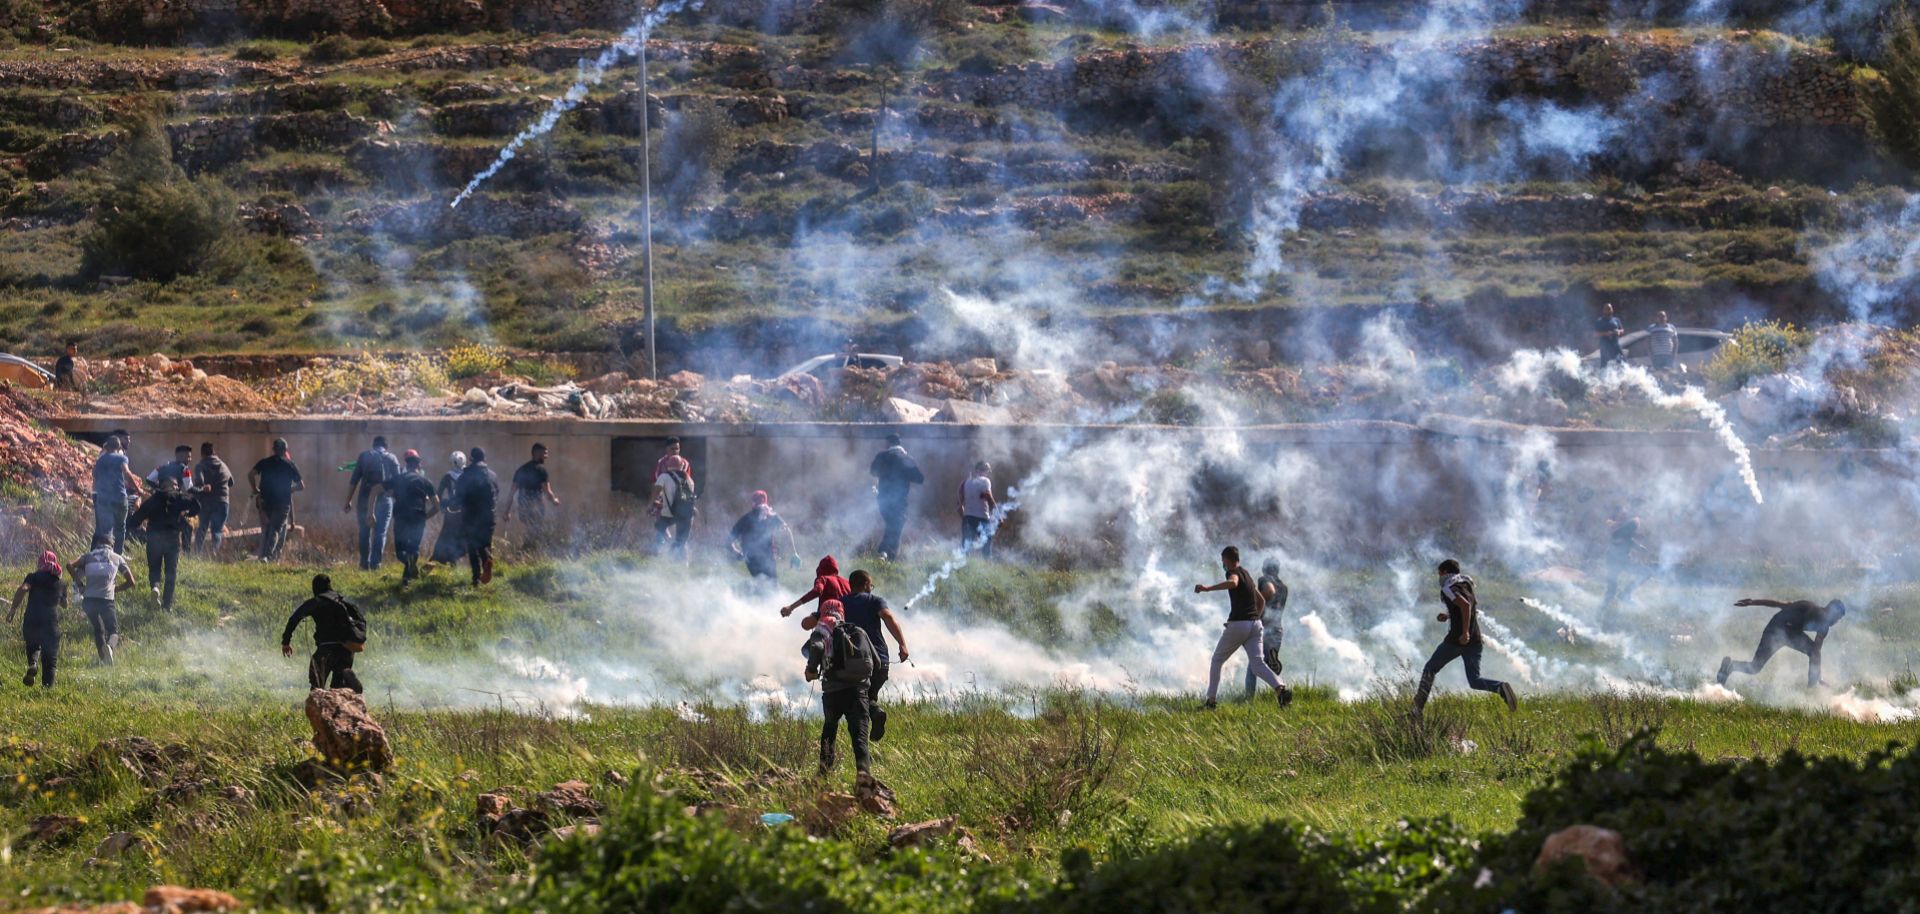 Palestinians run for cover during clashes with Israeli security forces near the Israeli settlement of Beit El in the occupied West Bank on April 11, 2022. 